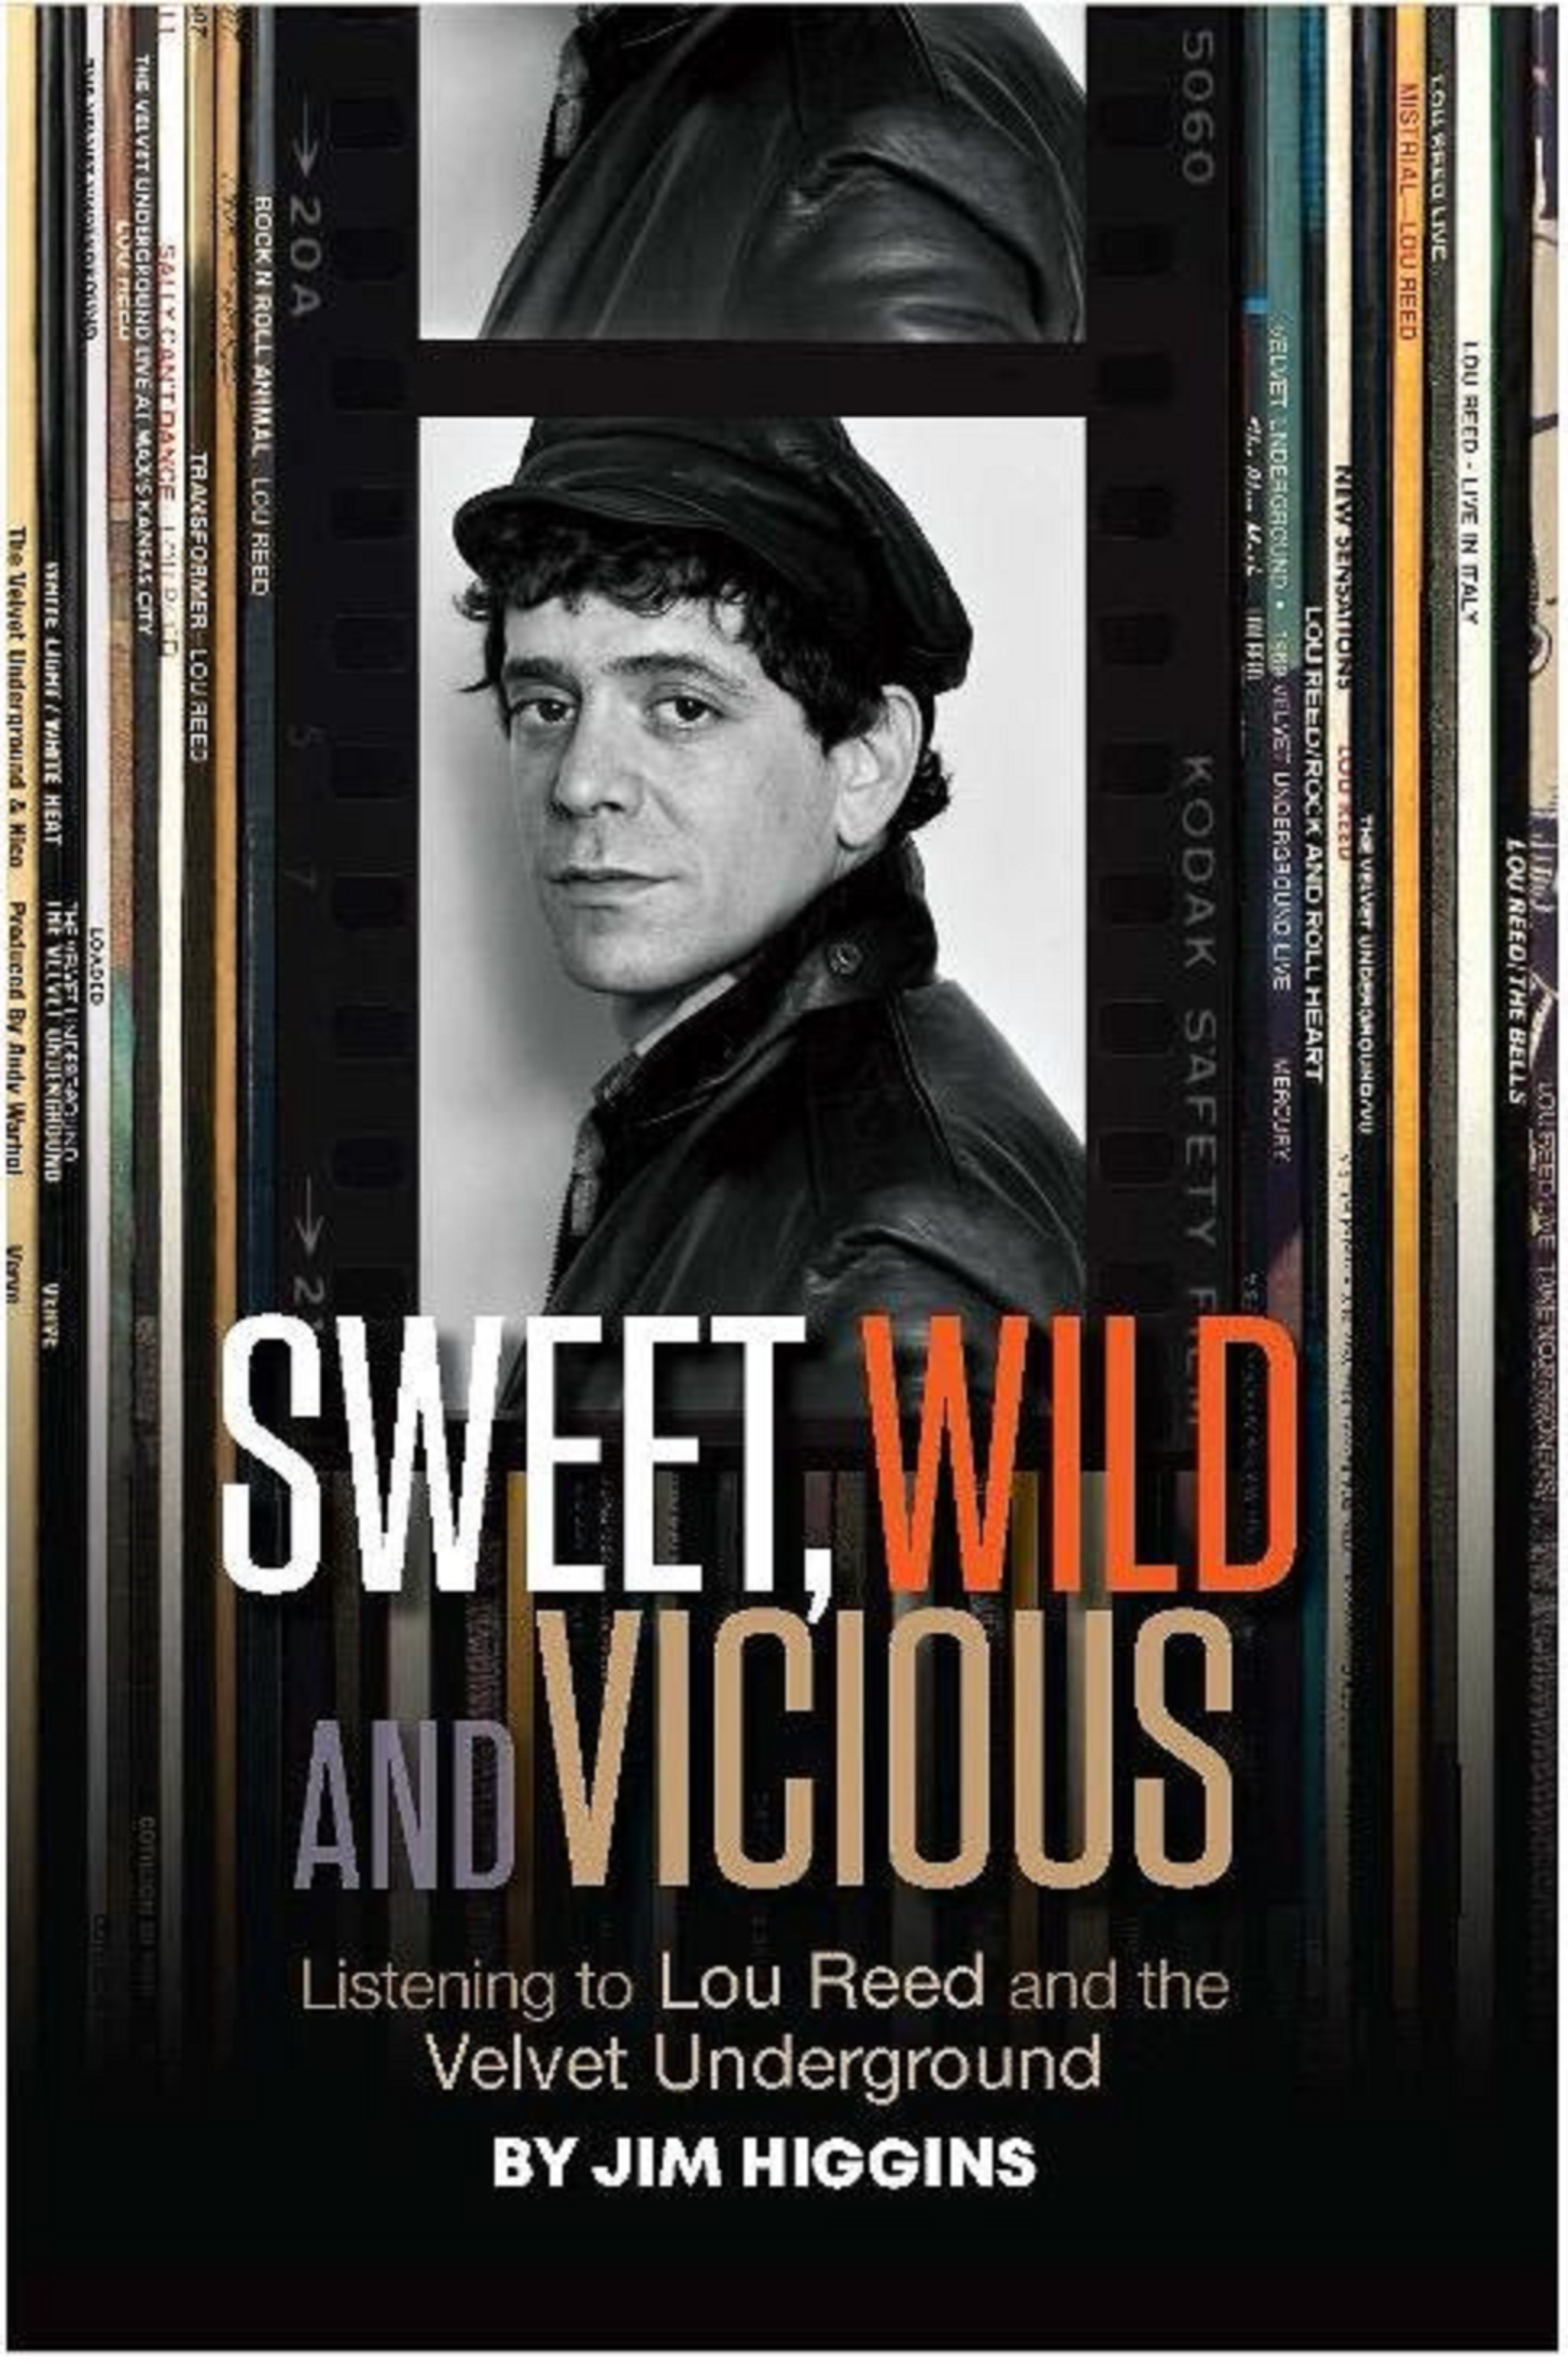 "Sweet, Wild and Vicious: Listening To Lou Reed and The Velvet Underground" Book Coming Soon